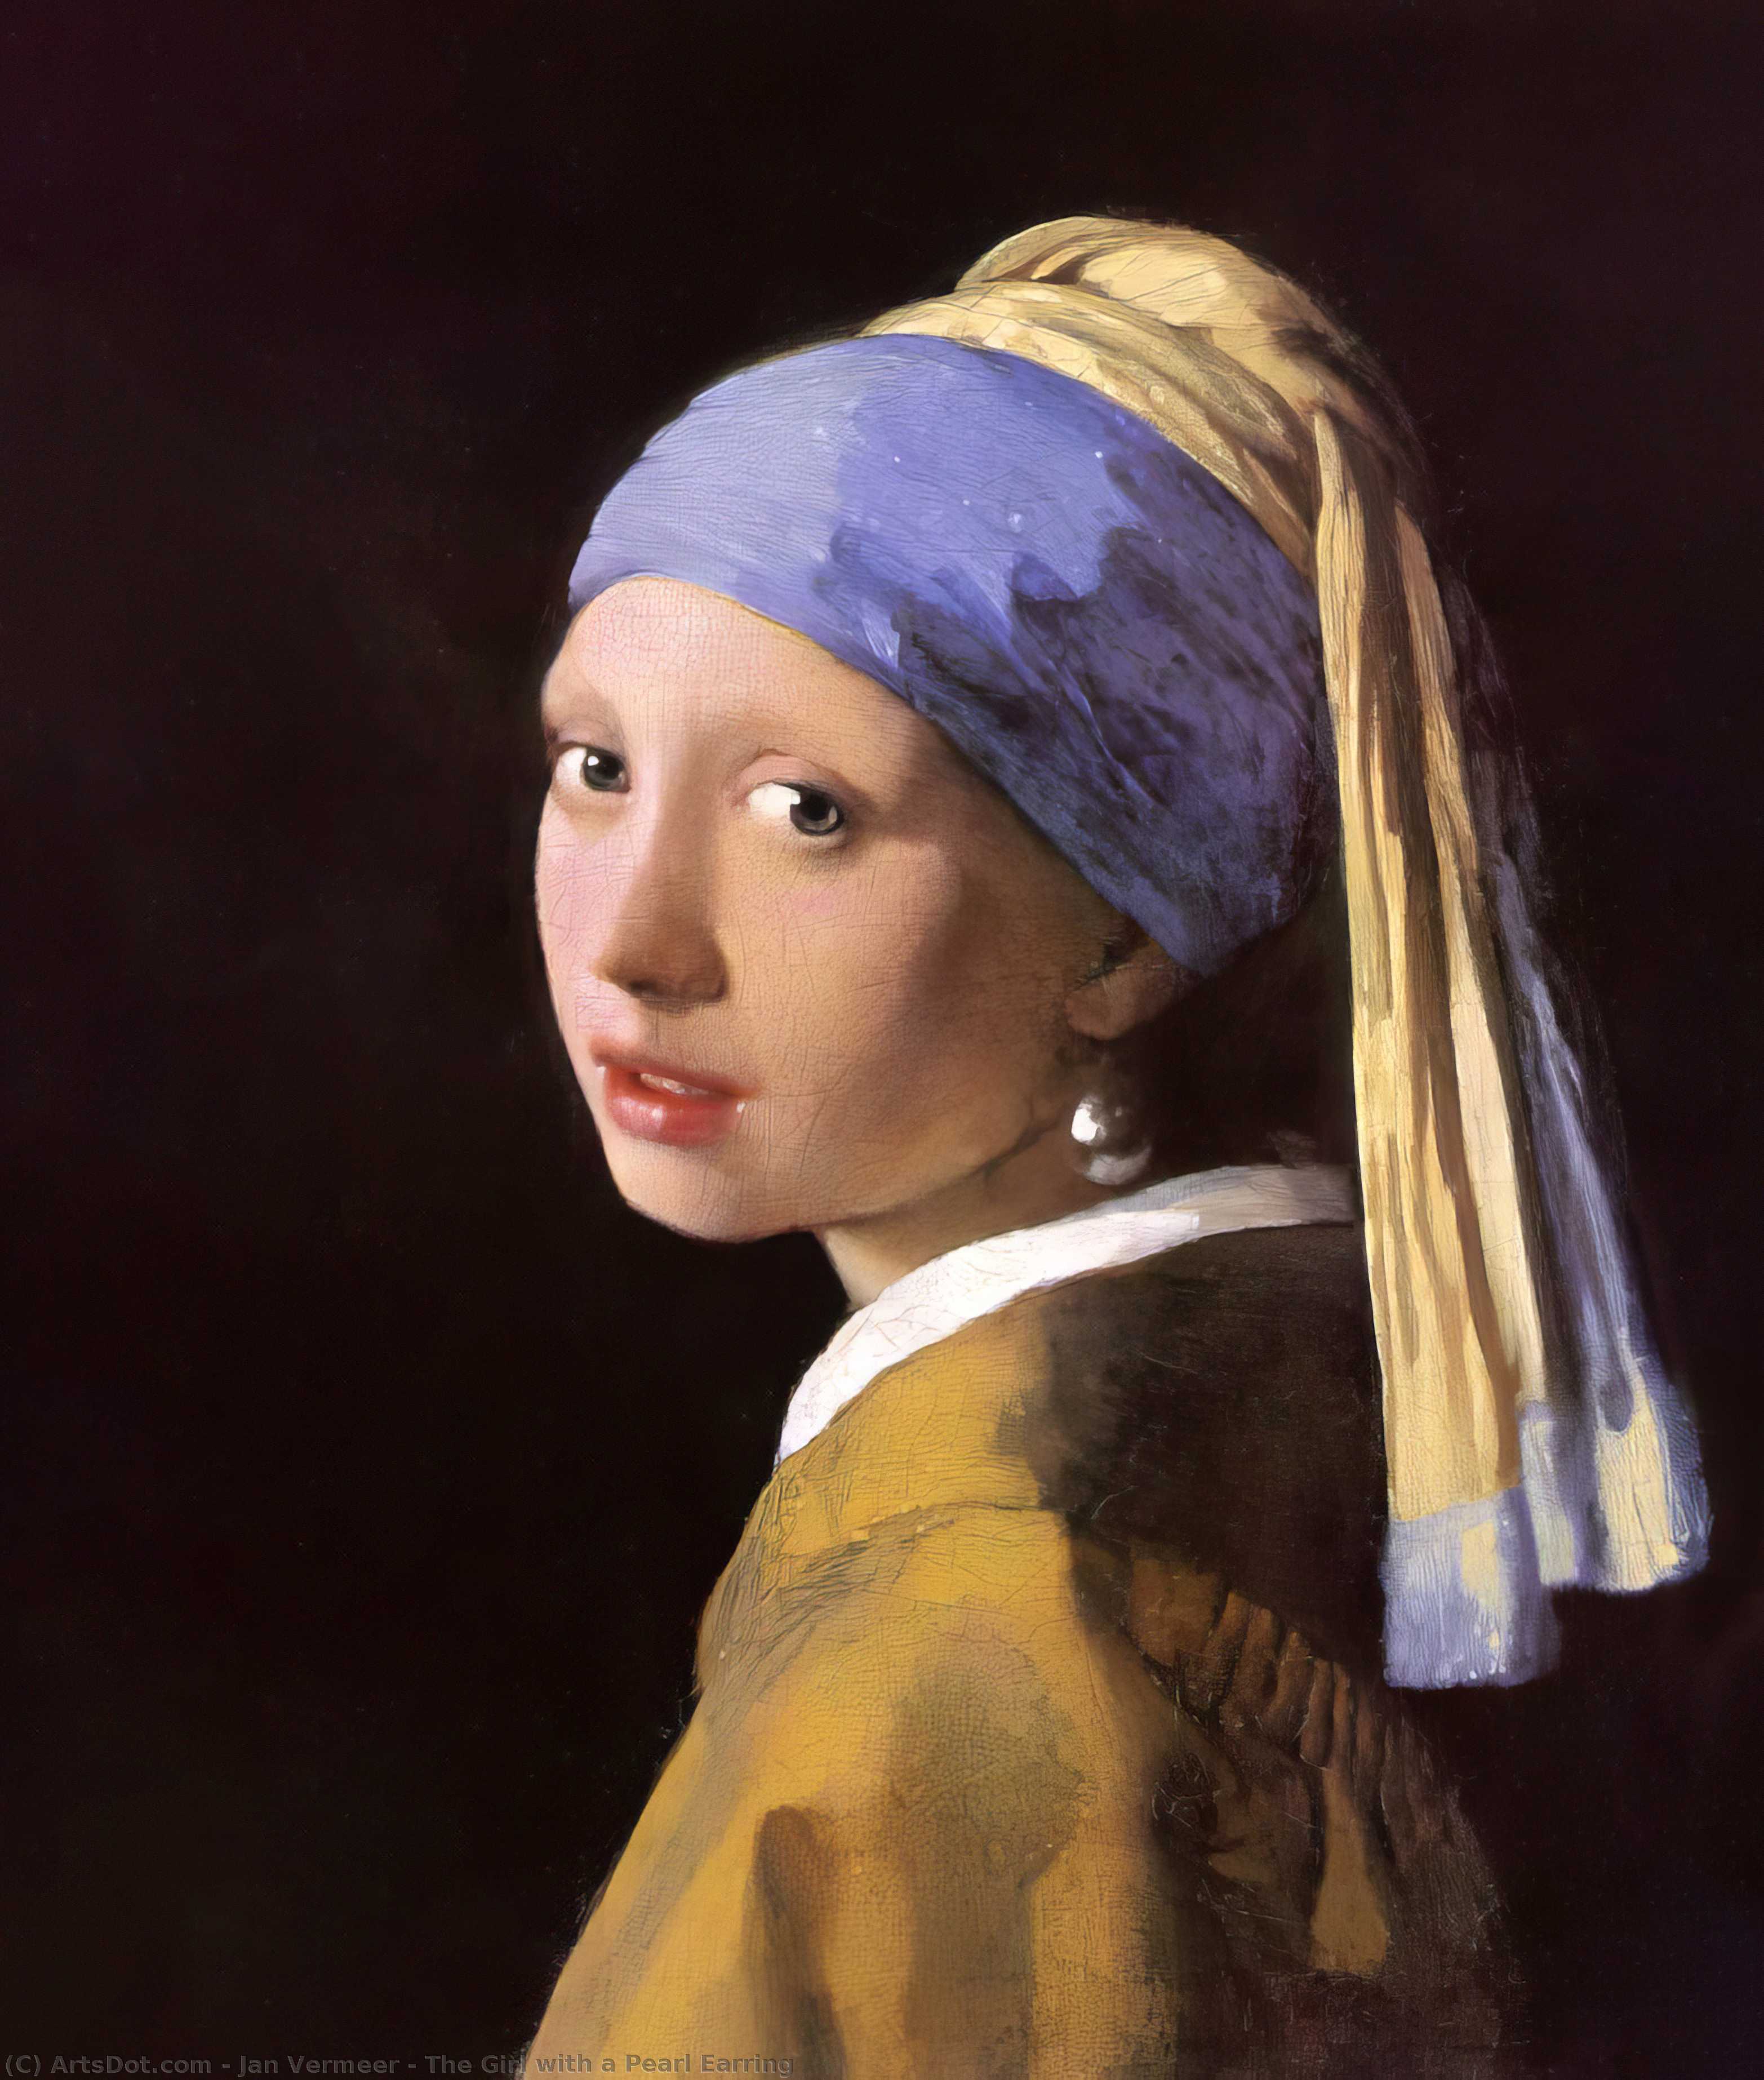 The Girl with a Pearl Earring - Jan Vermeer